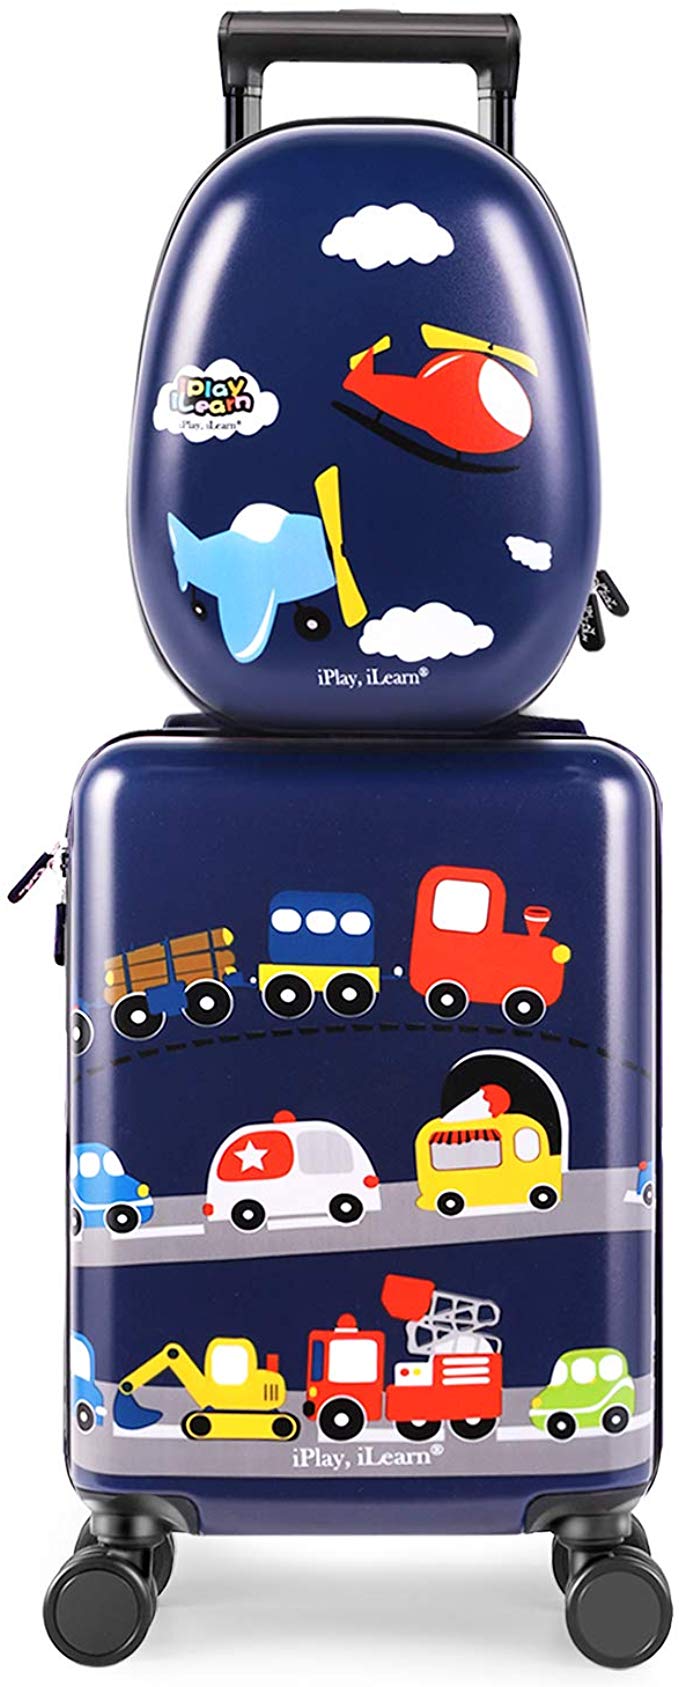 NLZQ Kids Luggage,Upright Hardside Carry on Luggage with 4 Spinner Wheels 19In Personalized Kids Suitcase Best Gifts for Kids-Suti for Travel School Camping